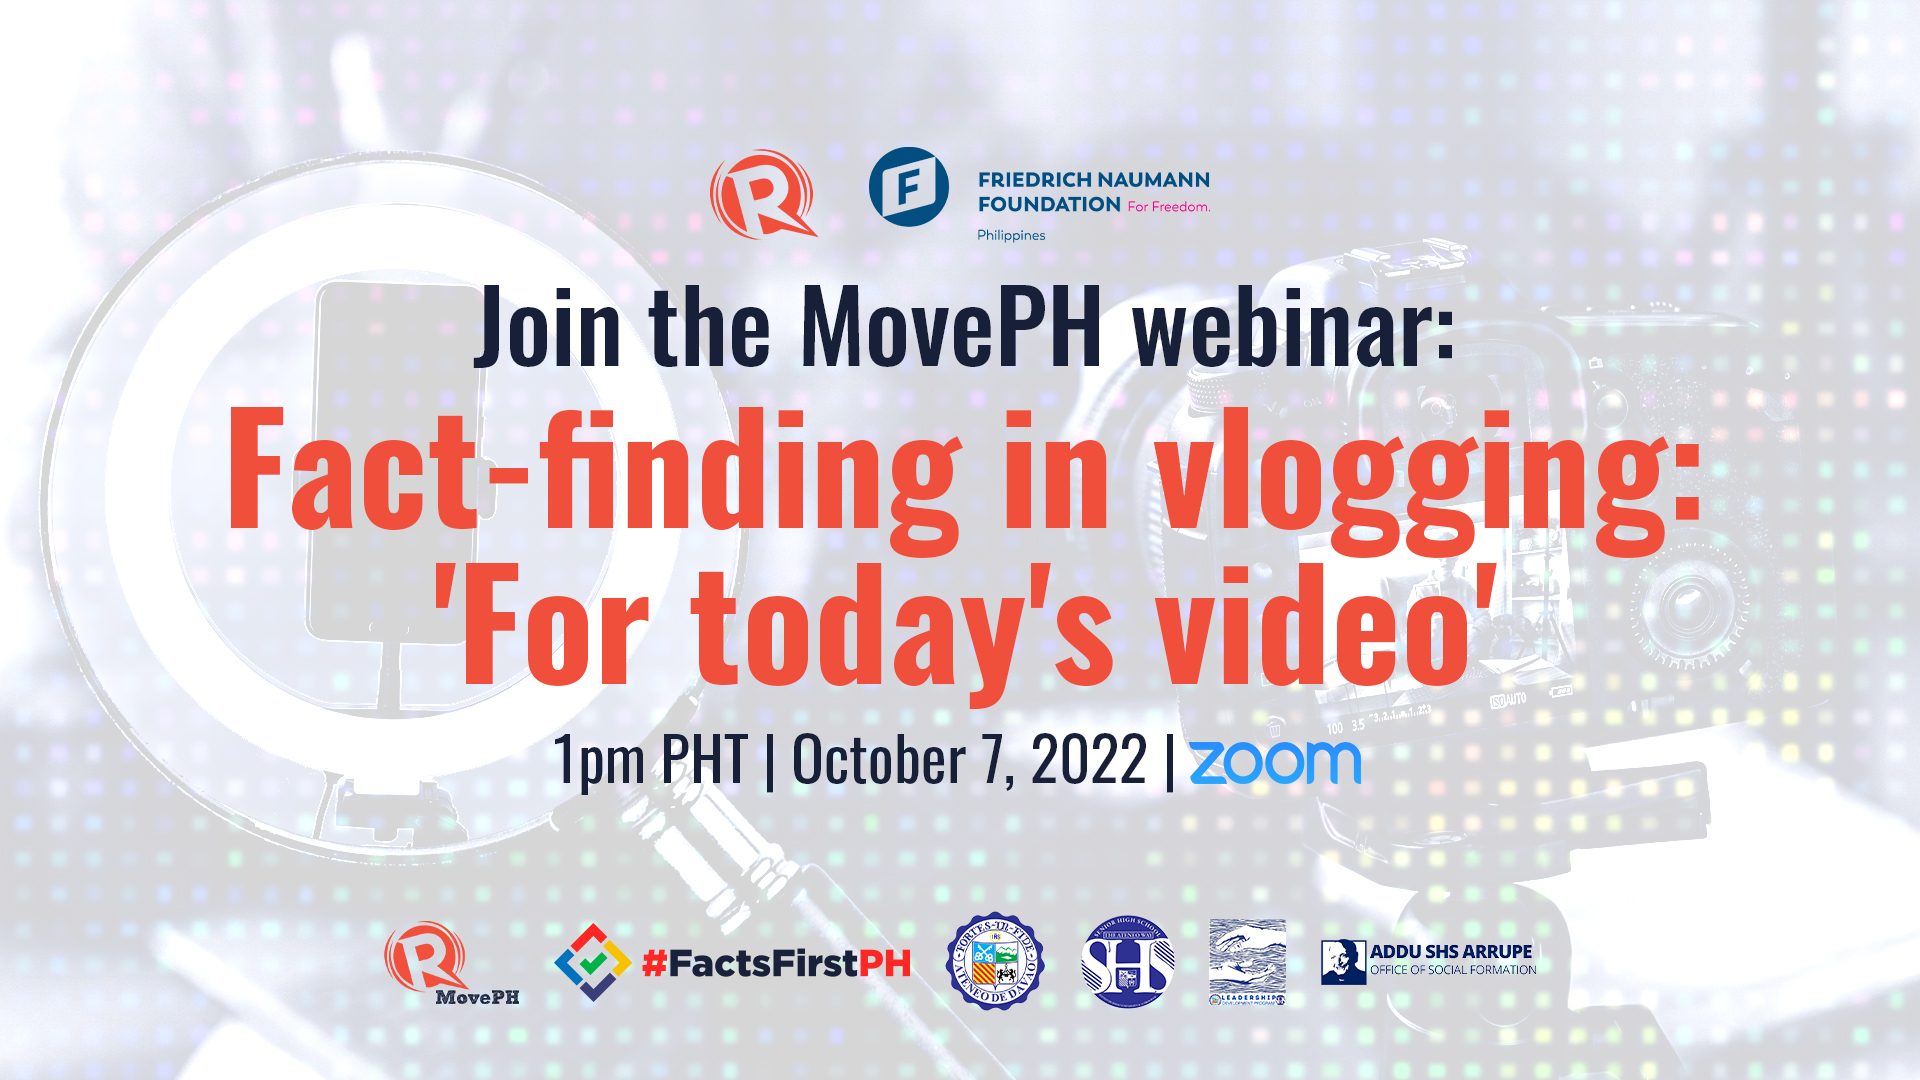 Join MovePH’s webinar, ‘Fact-finding in vlogging: For today’s video’